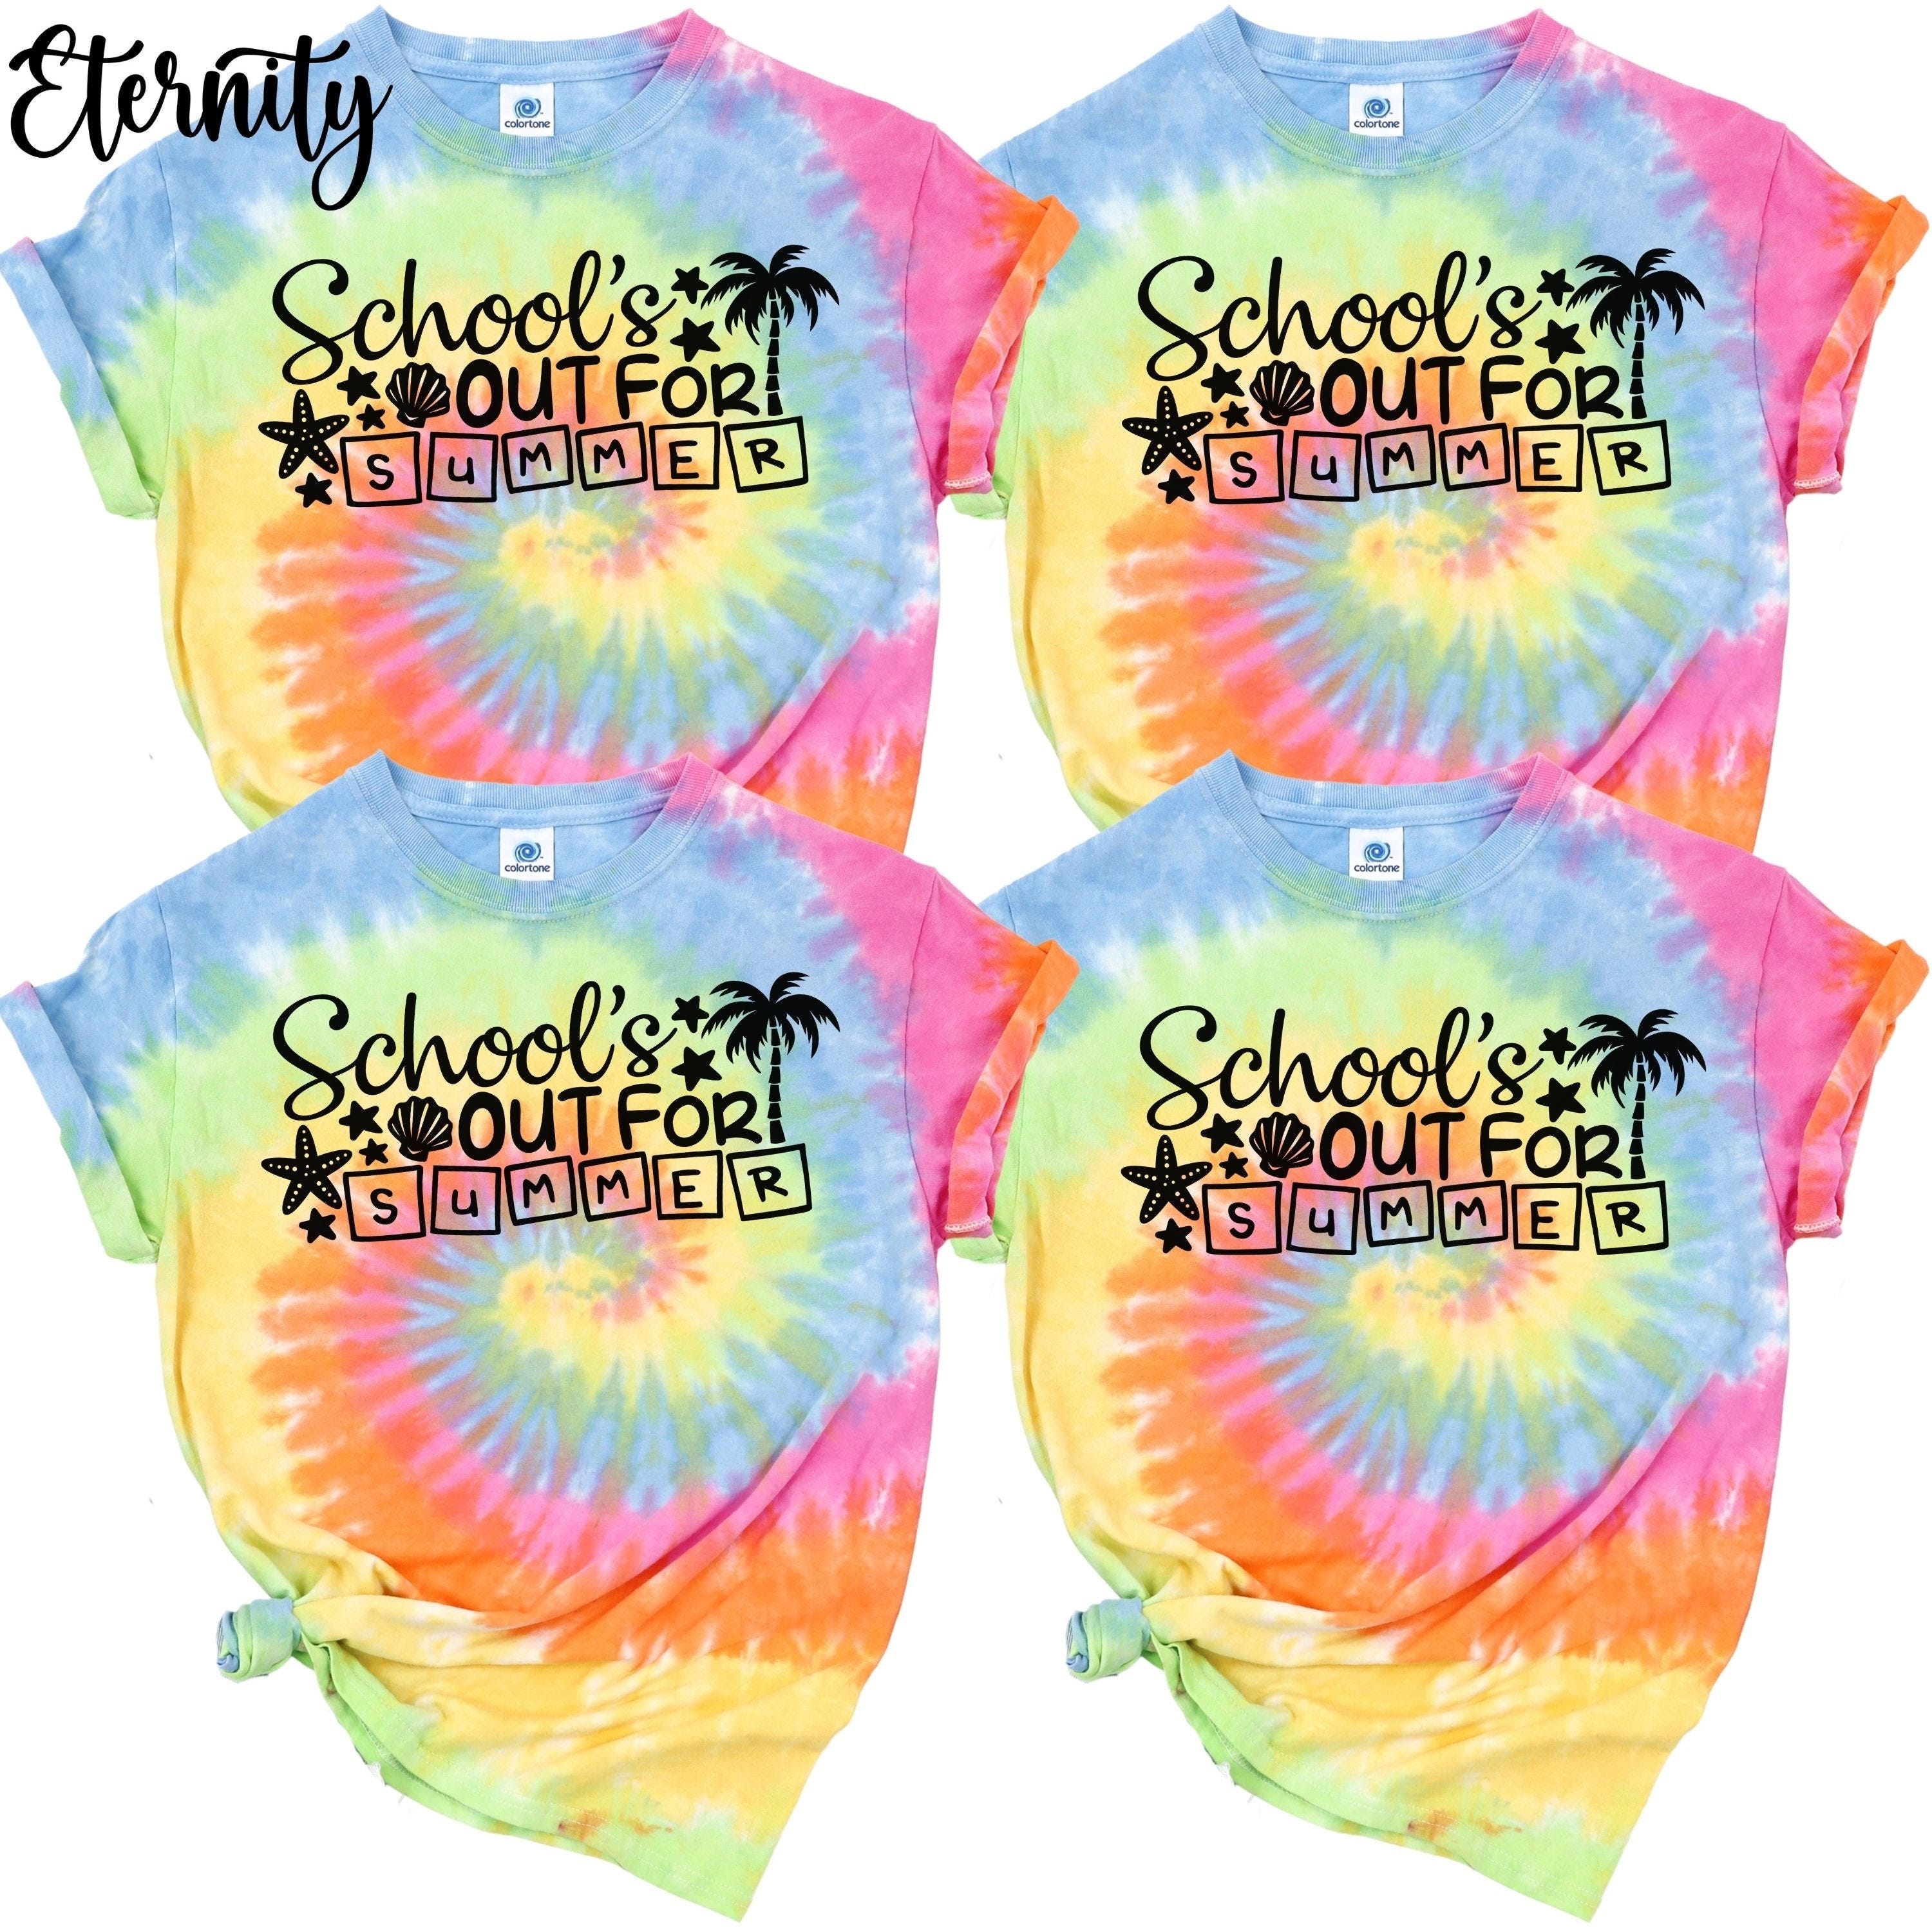 School’s Out For Summer Tie Dye T-Shirts, Happy Last Day Of School Shirts, Summer End Of Year Student Teacher Team Squad Matching Tees